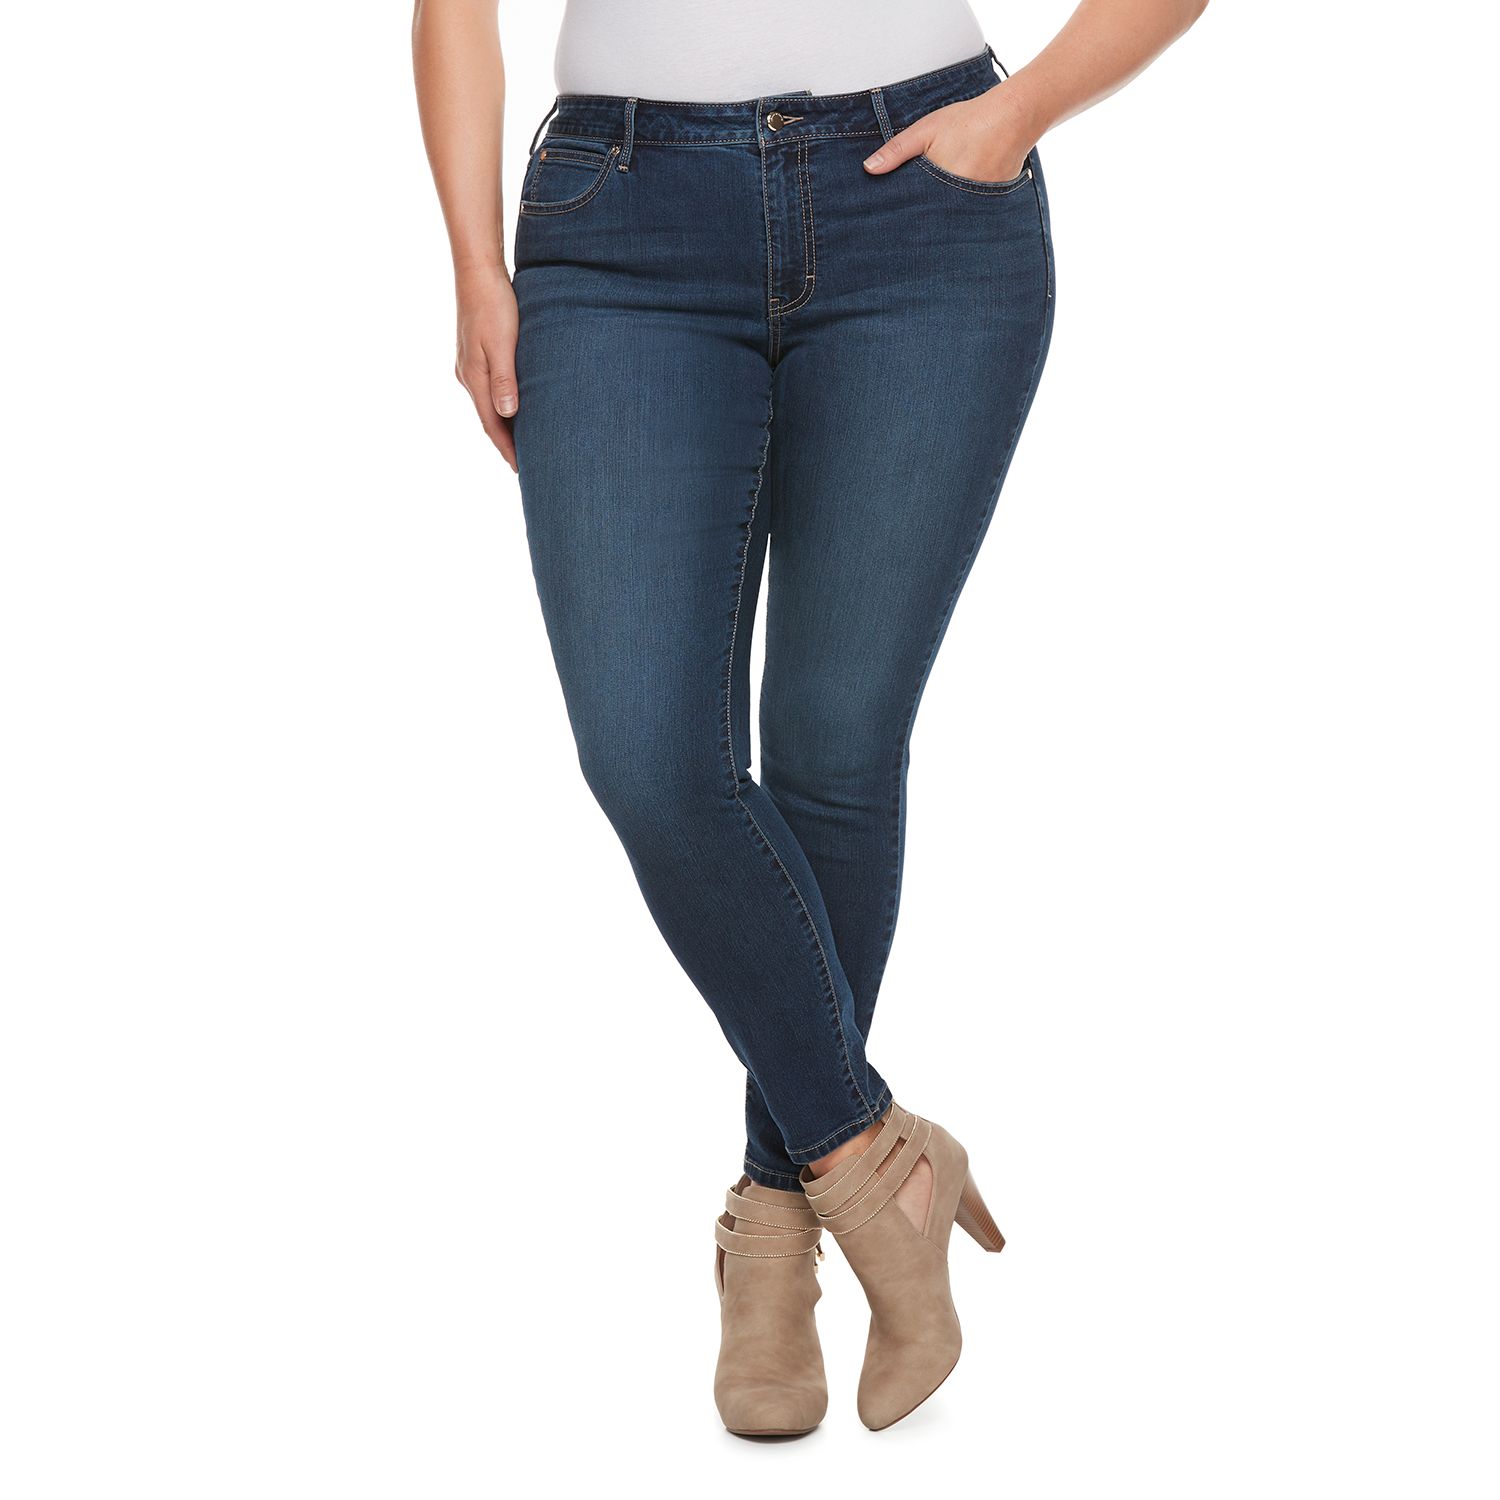 size 27 womens jeans